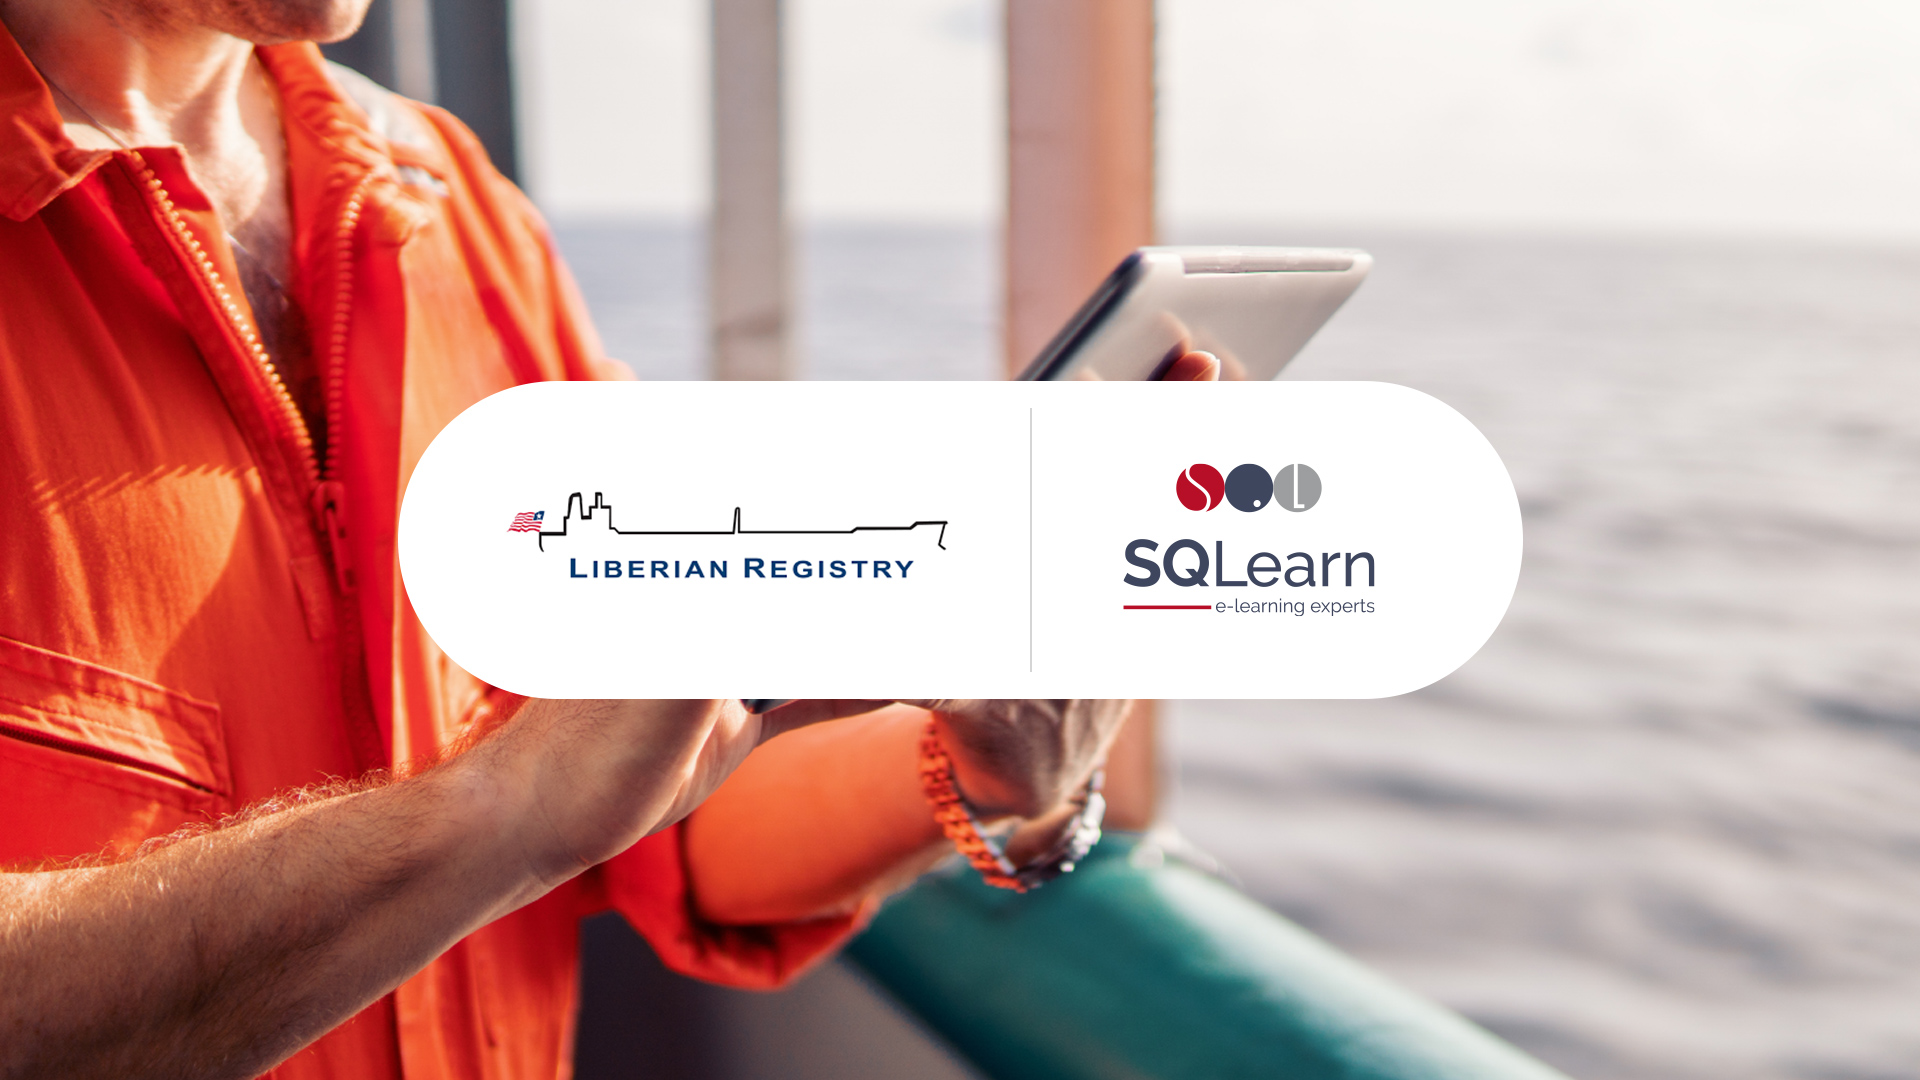 Liberian Registry will certify SQLearn’s e-learning maritime library and STCW e-learning courses